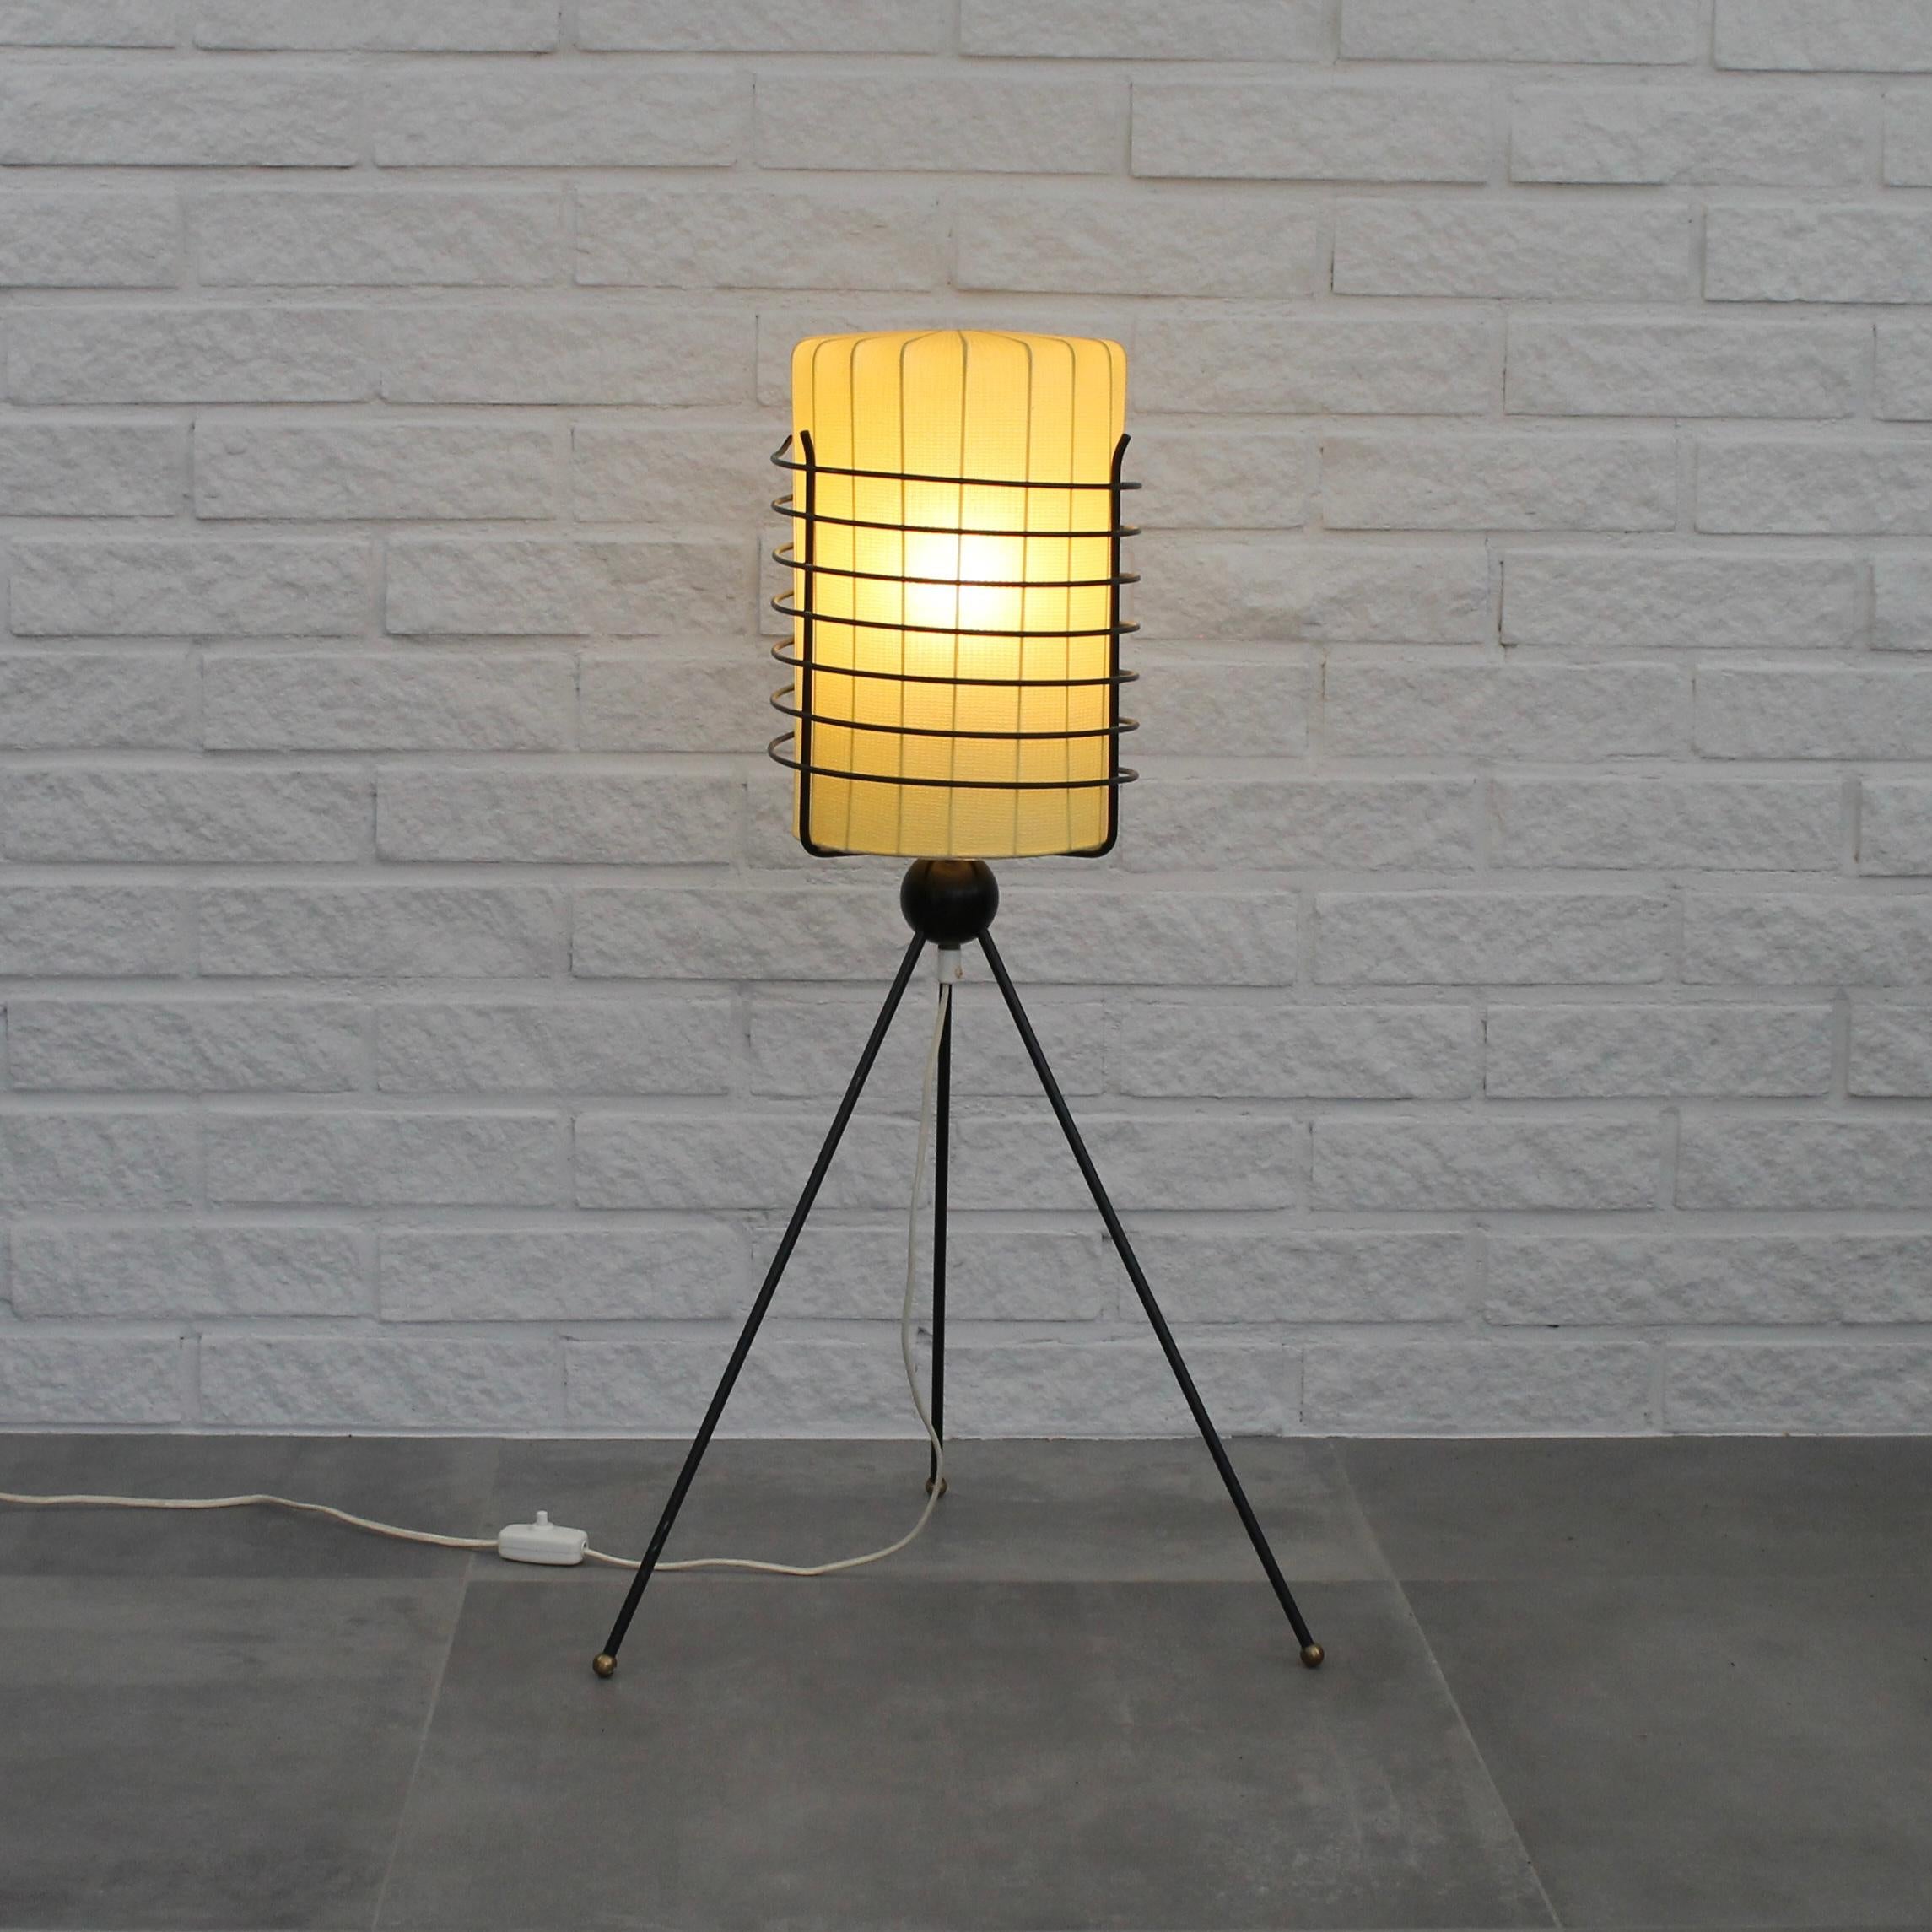 Rare mid-century Swedish floor lamp produced by Trema Industri, c. 1958. The lamp features a metal tripod base with a black metal cage that cradles a cylindrical lampshade enveloped in plastic-coated Texopla textile. Its feet are adorned with small